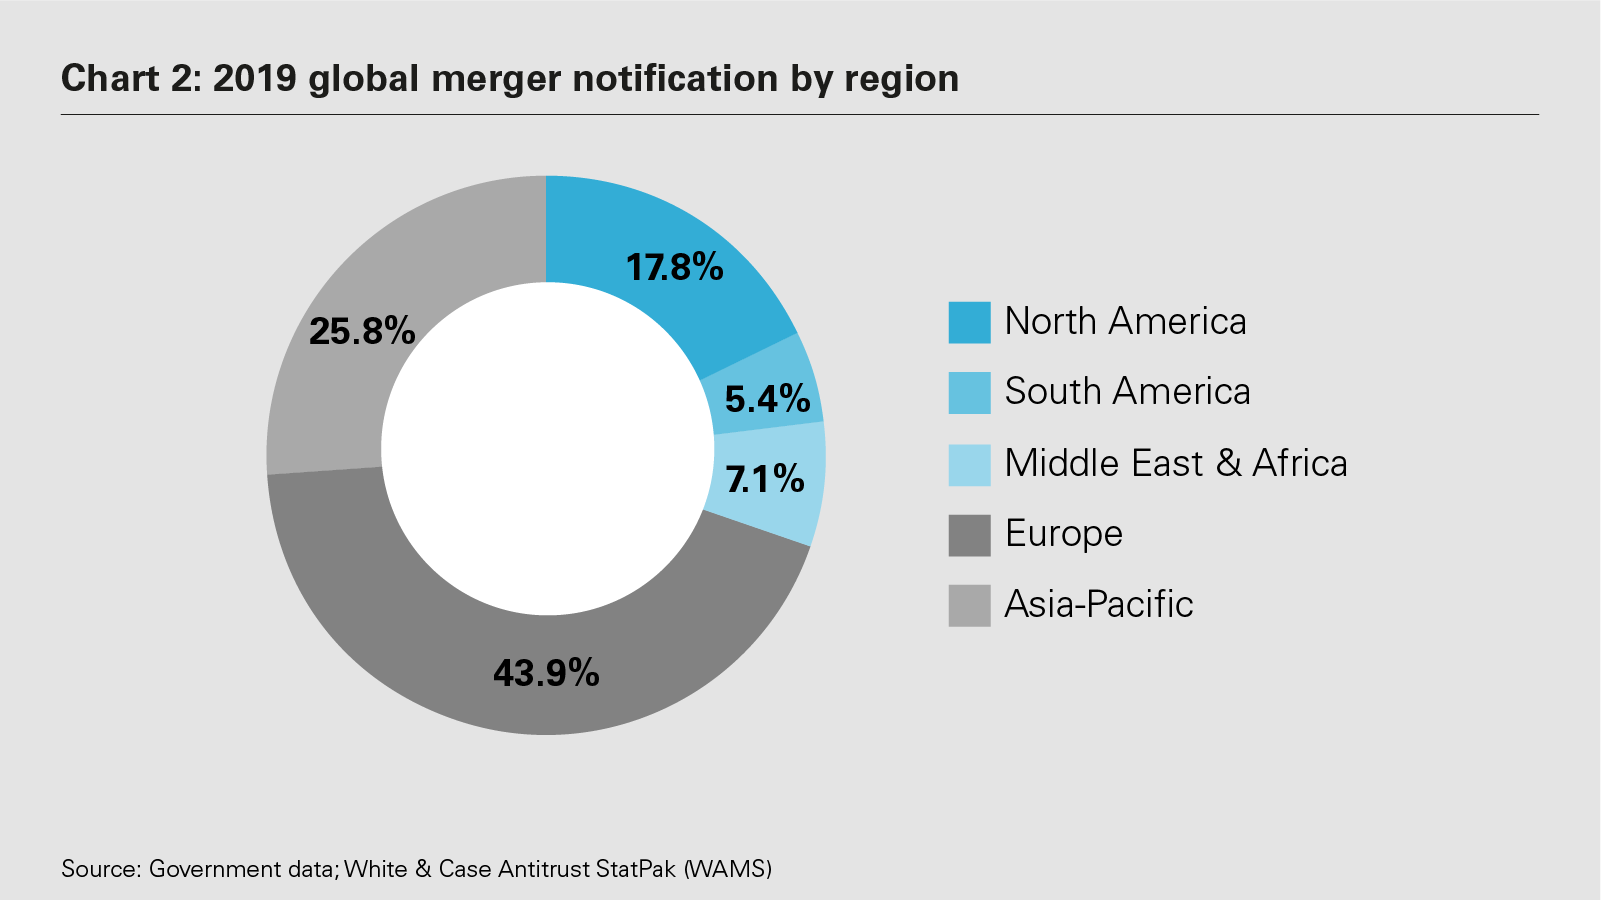 View full image: Chart 2: 2019 global merger notification by region ()PPPPPPPp